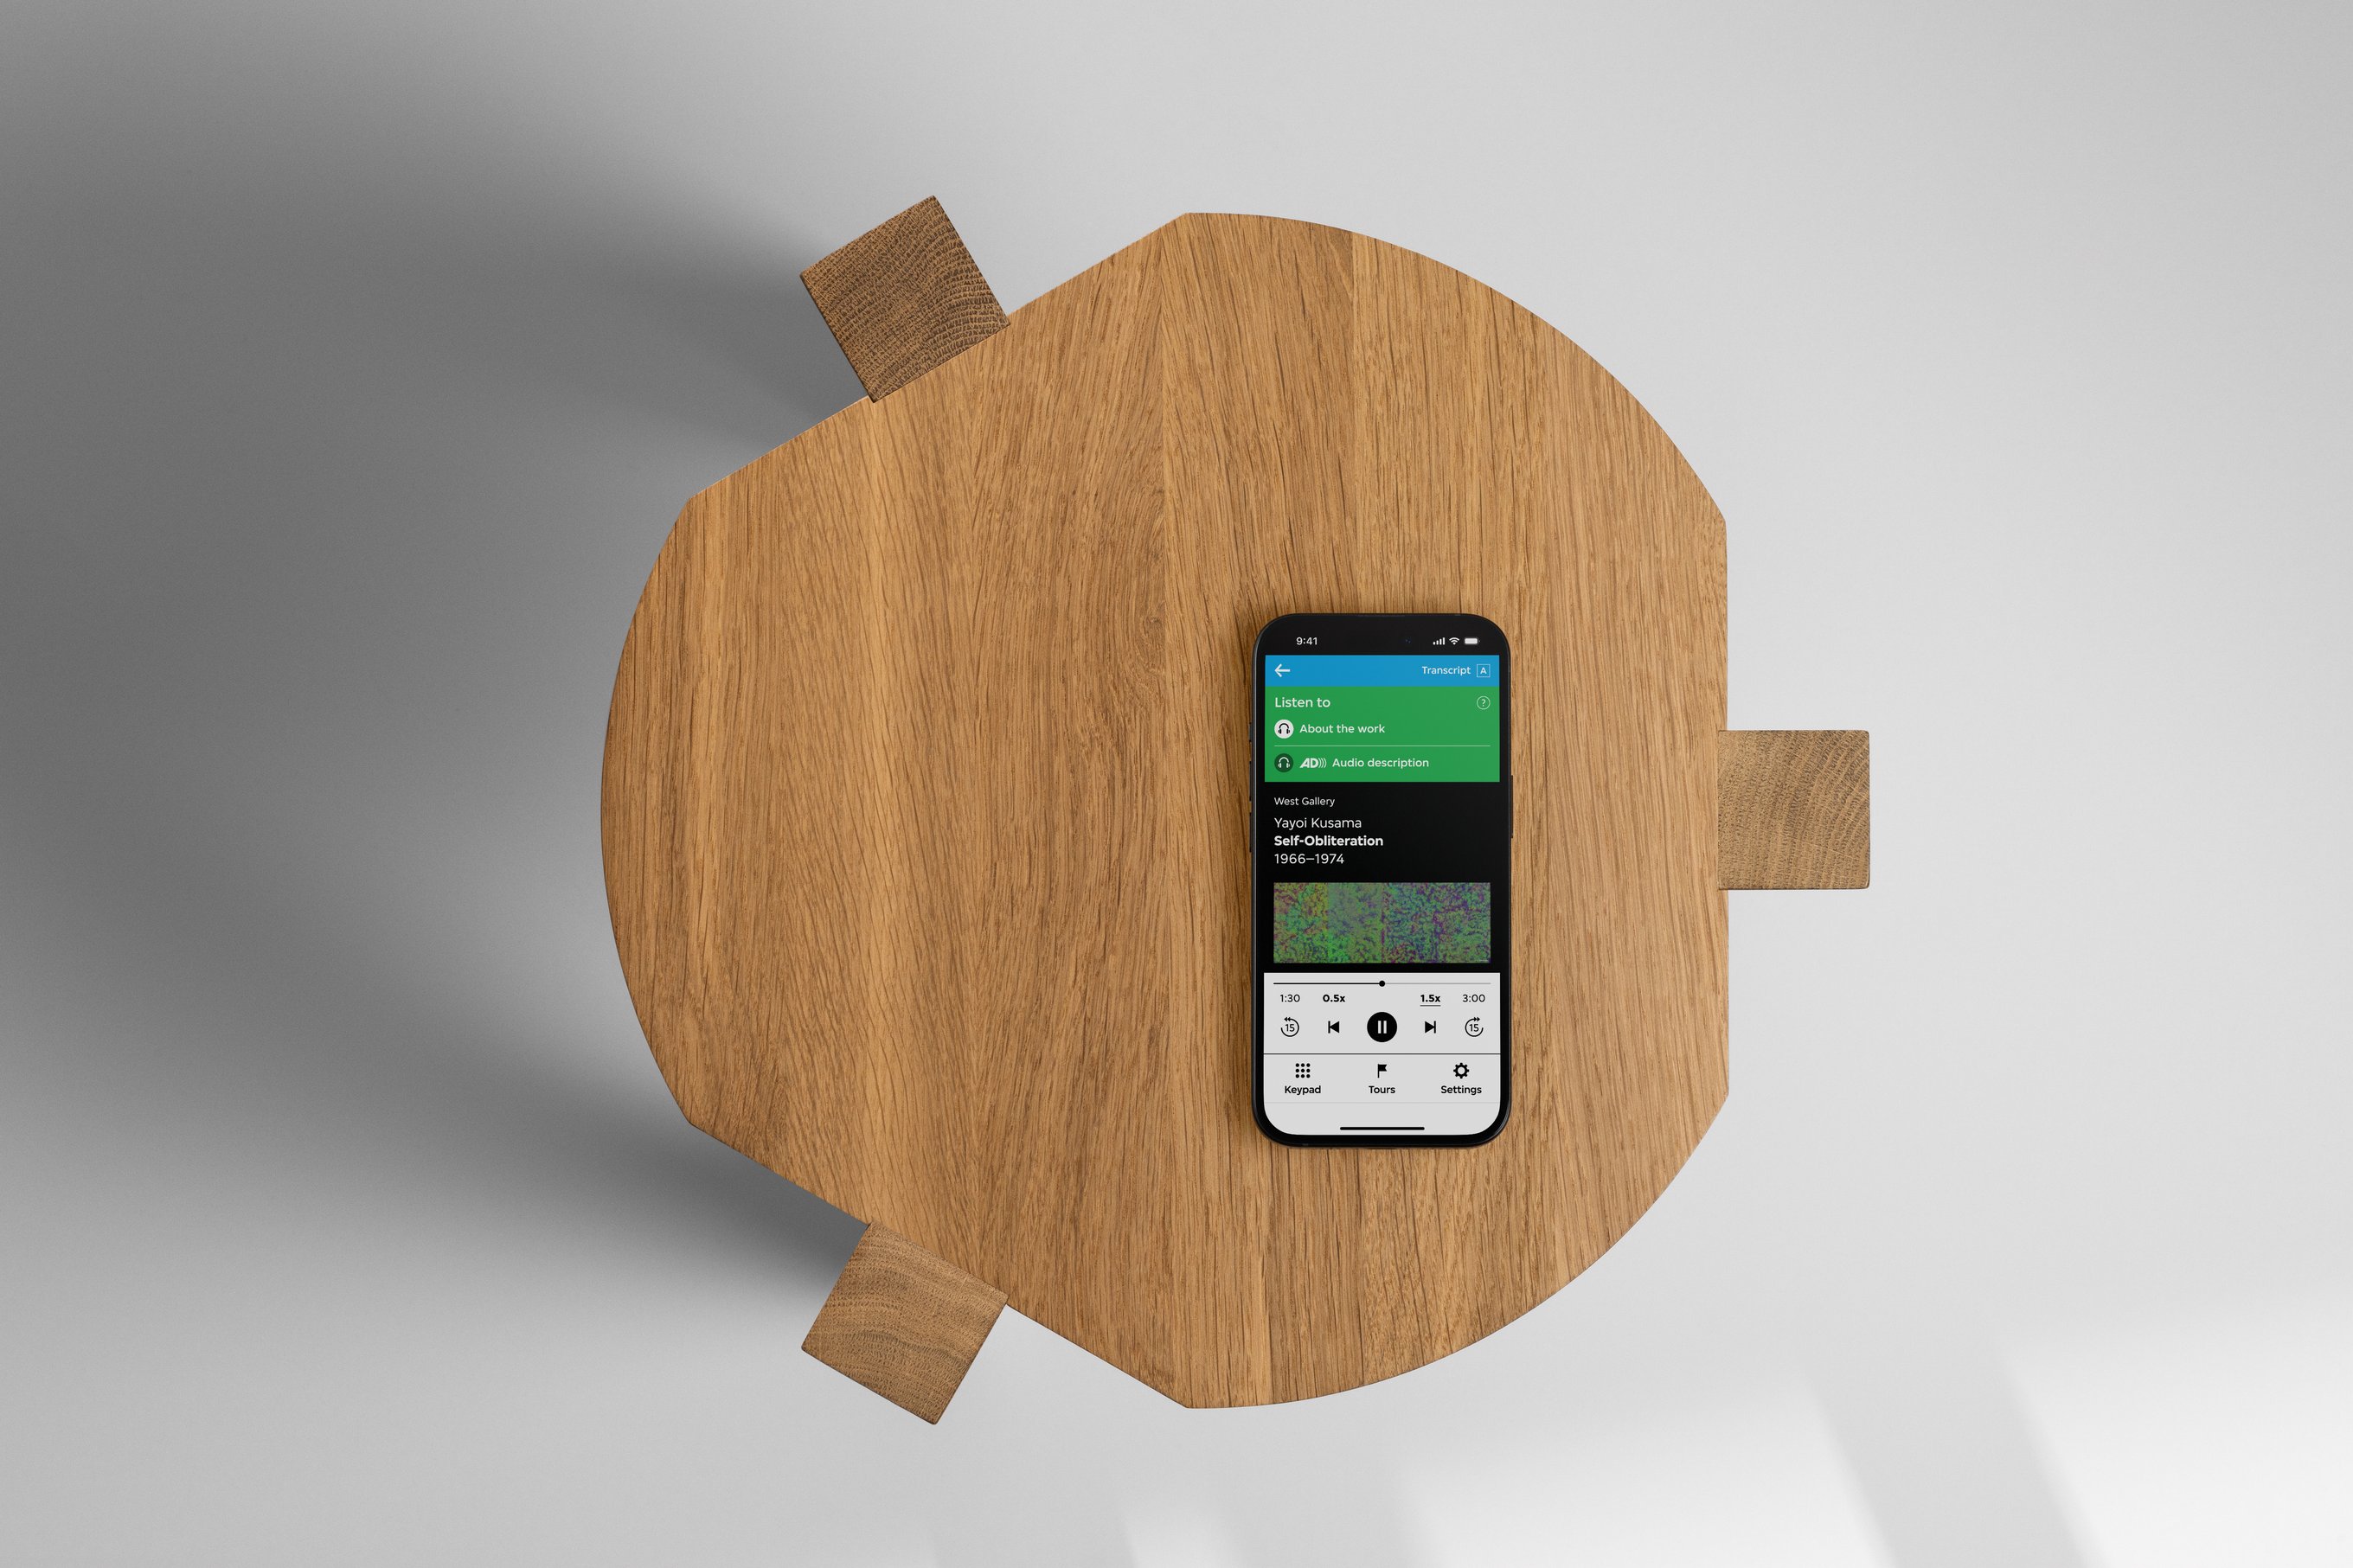 A bird's eye view of an iPhone on a wooden stool.